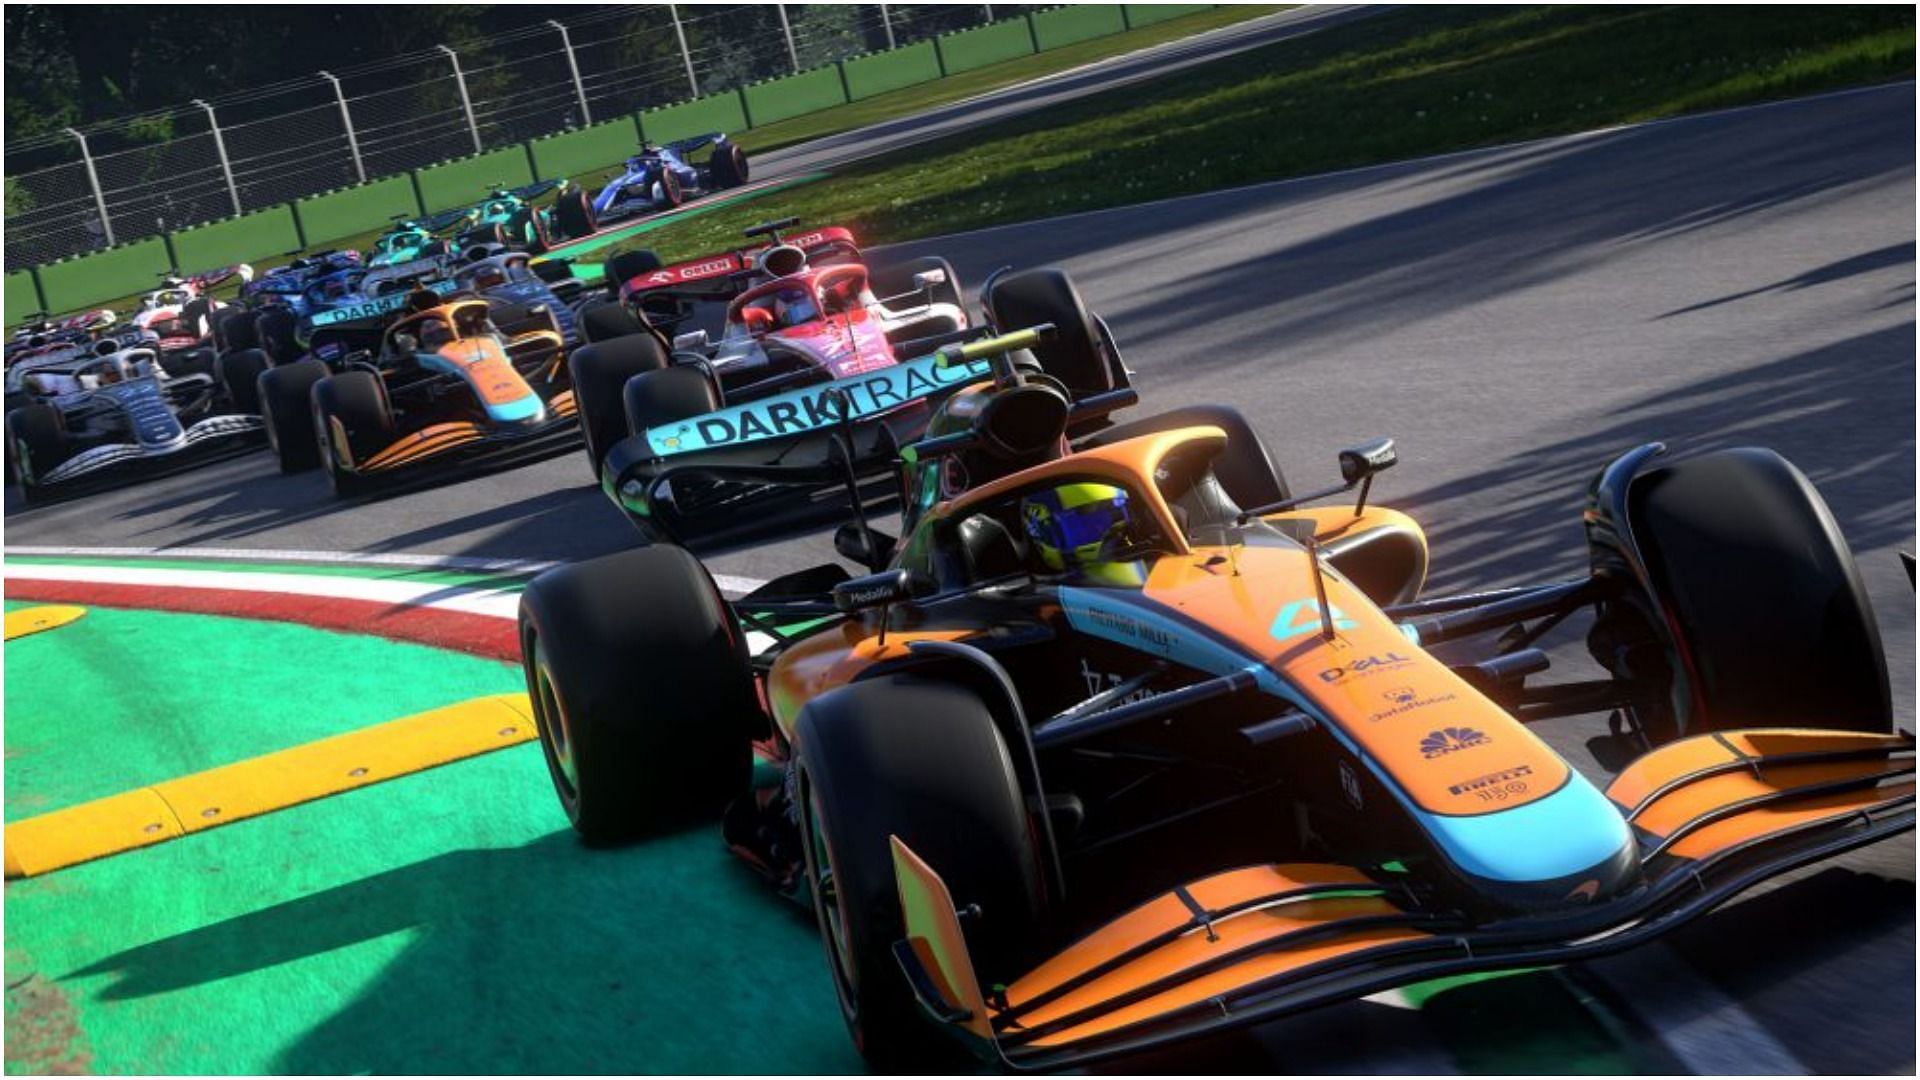 F1 22 release date, game modes, and more revealed